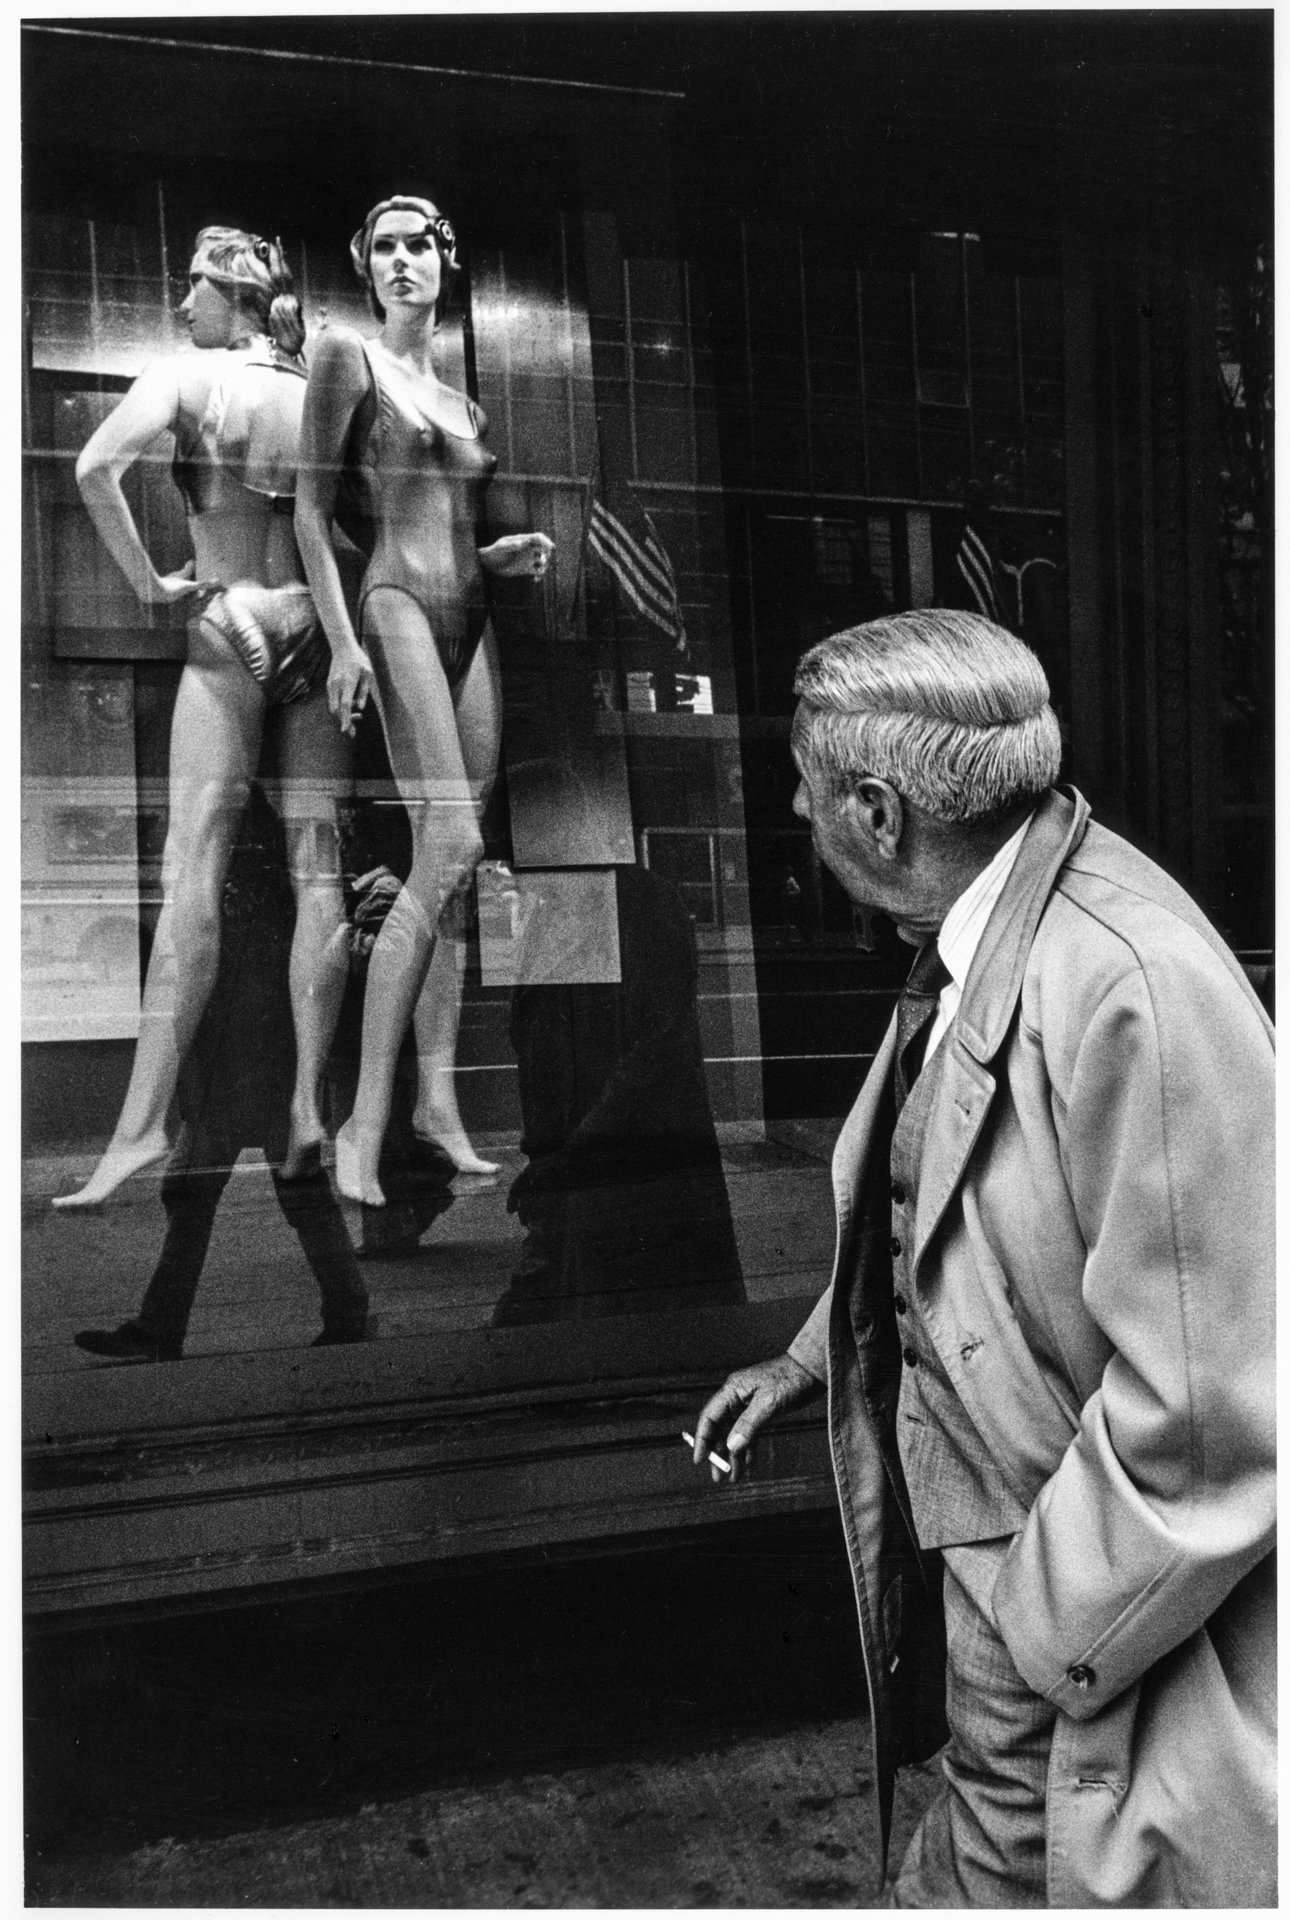 Store Window, 34th St., NYC, 1985